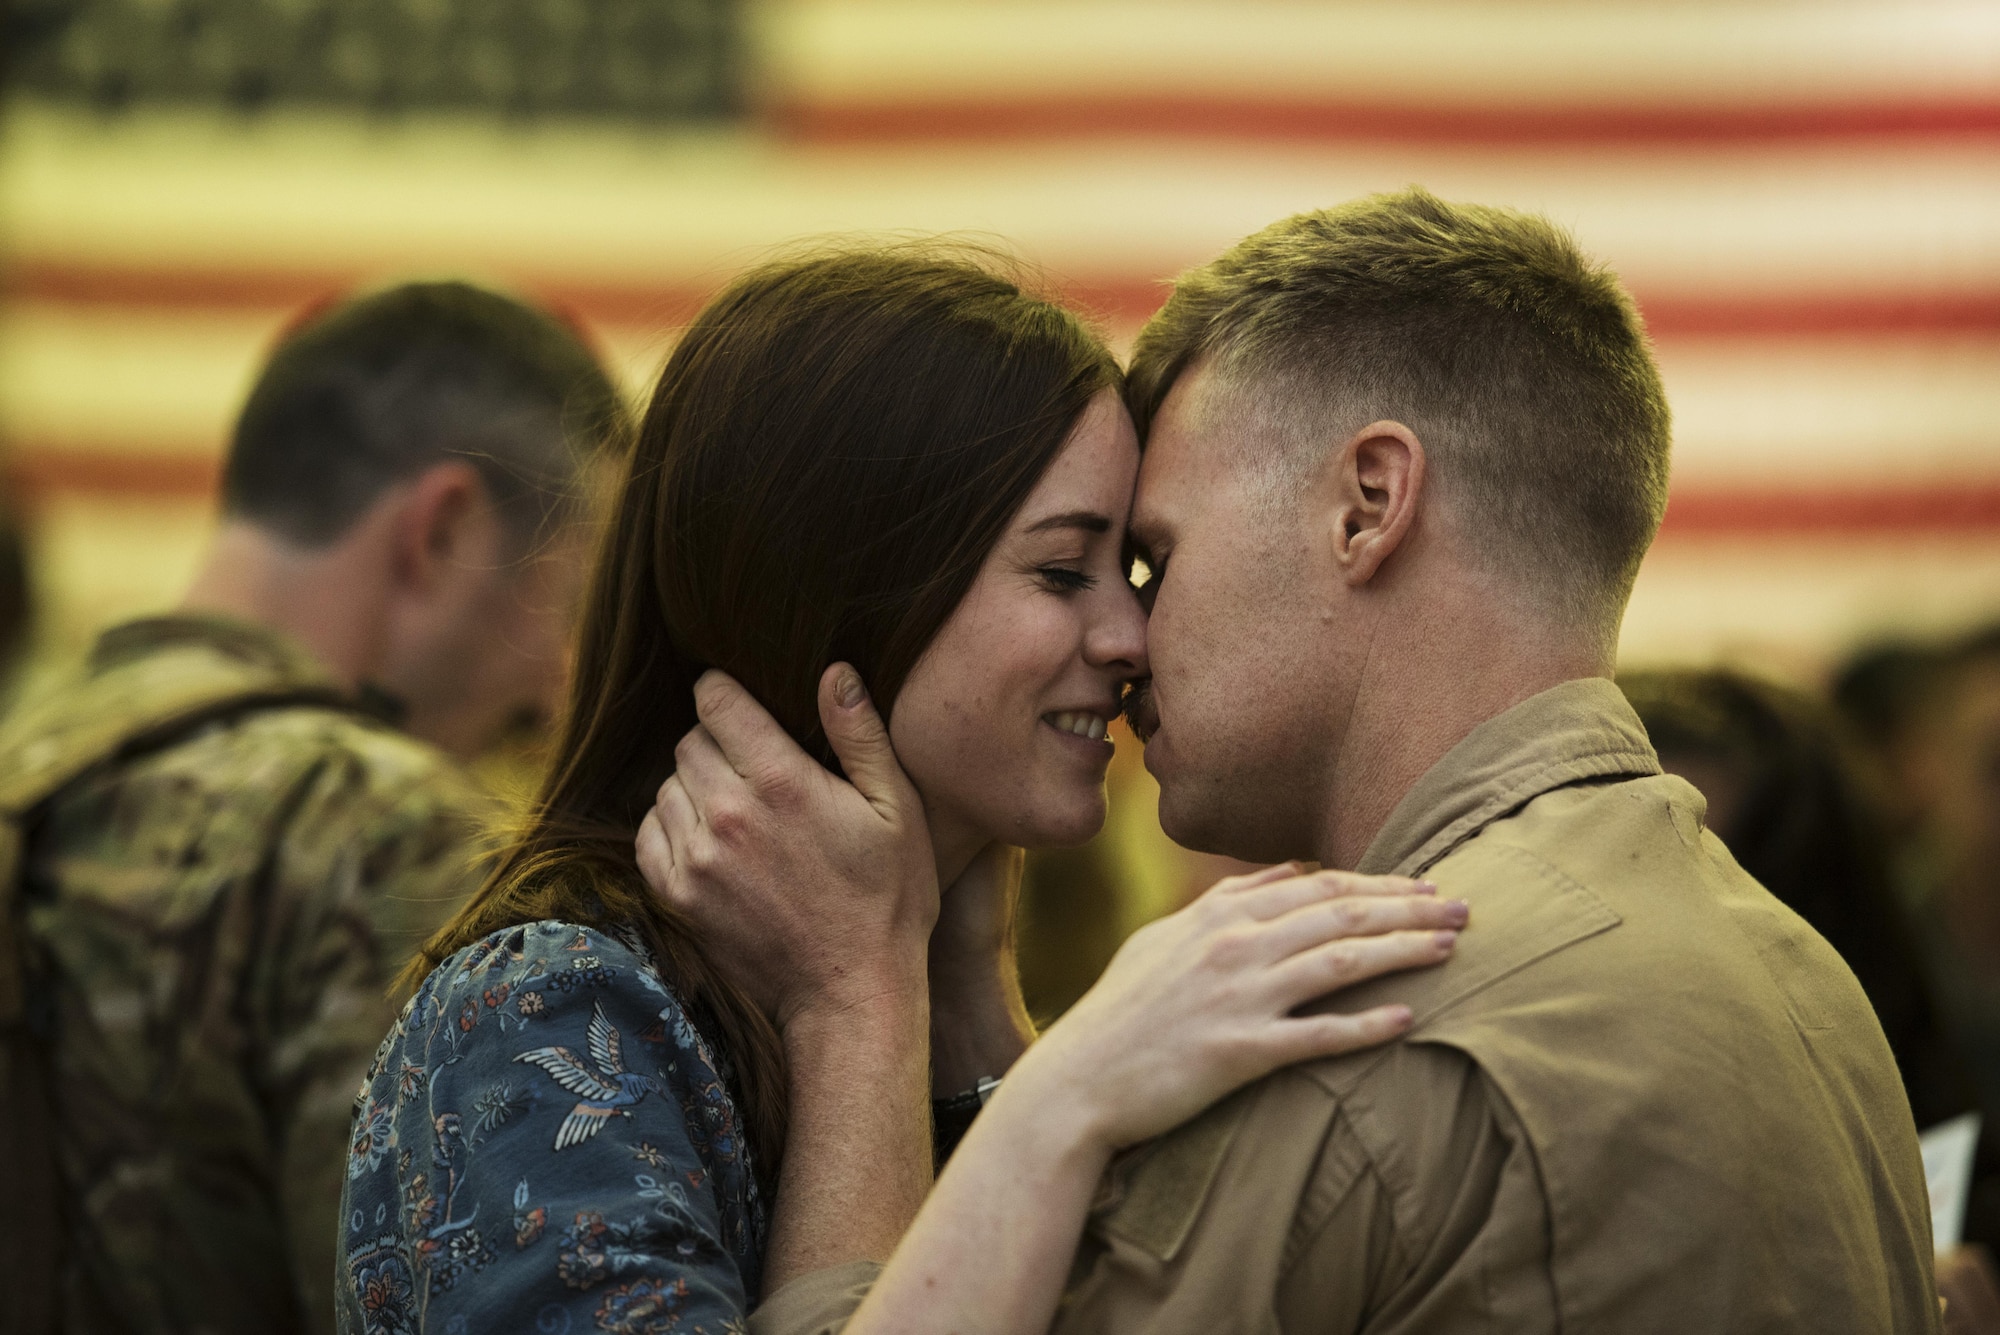 An Airman assigned to the 480th Expeditionary Fighter Squadron reunites with his loved one during the squadron’s
return from Southwest Asia to Spangdahlem Air Base, Germany, Oct. 12, 2016. The 480th EFS deployed in support
of Operation Inherent Resolve’s, which aims to militarily defeat enemy forces in the Combined Joint Operations
Area by, with and through regional partners in order to enable whole-of-governmental actions to increase regional
stability by conducting a campaign against enemy forces in Iraq and Syria. (U.S. Air Force photo by Staff Sgt.
Jonathan Snyder)